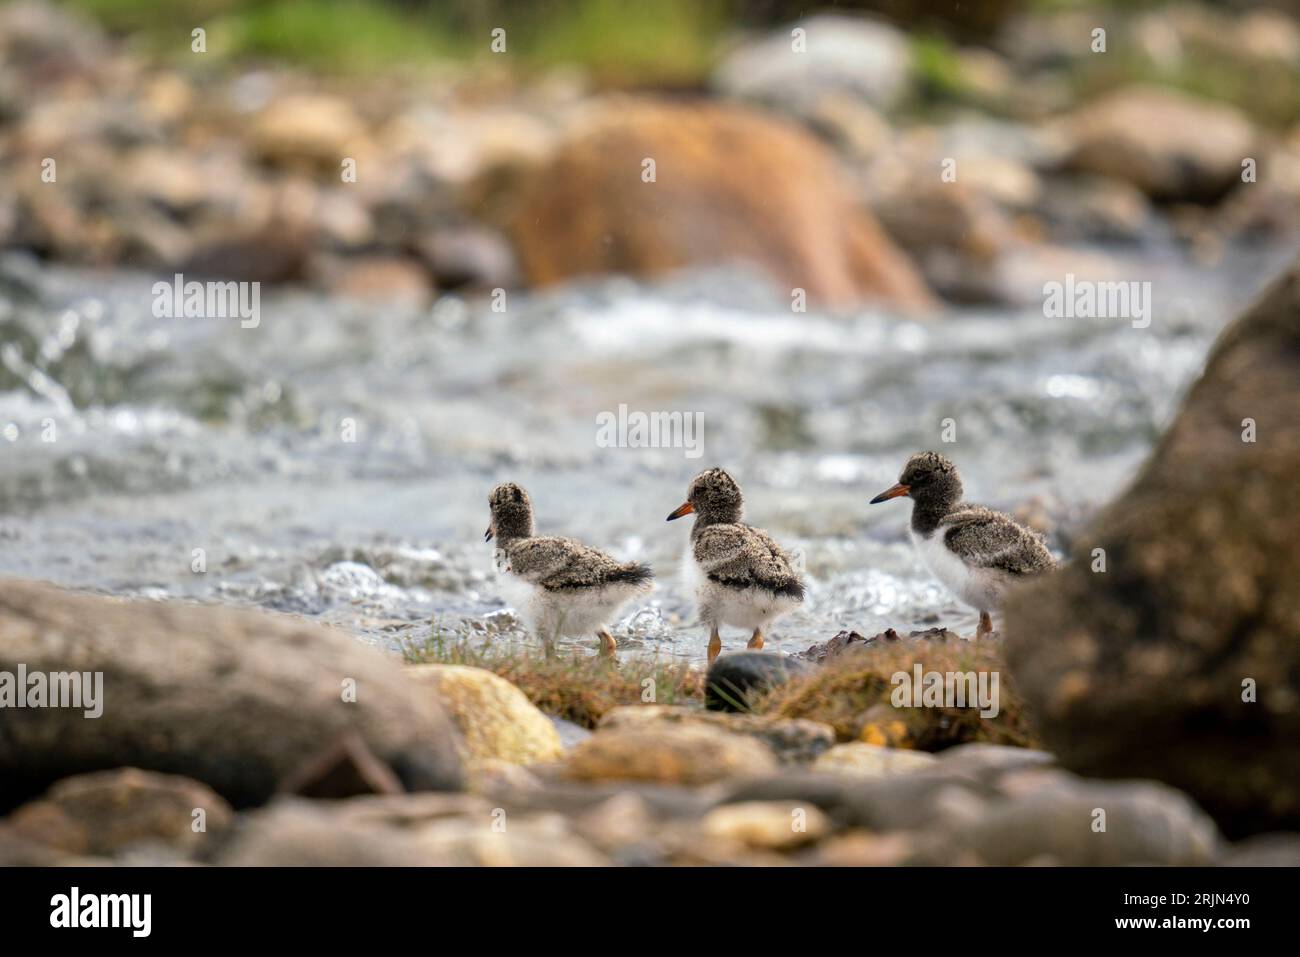 The three small birds standing on rocks in a body of water. Stock Photo